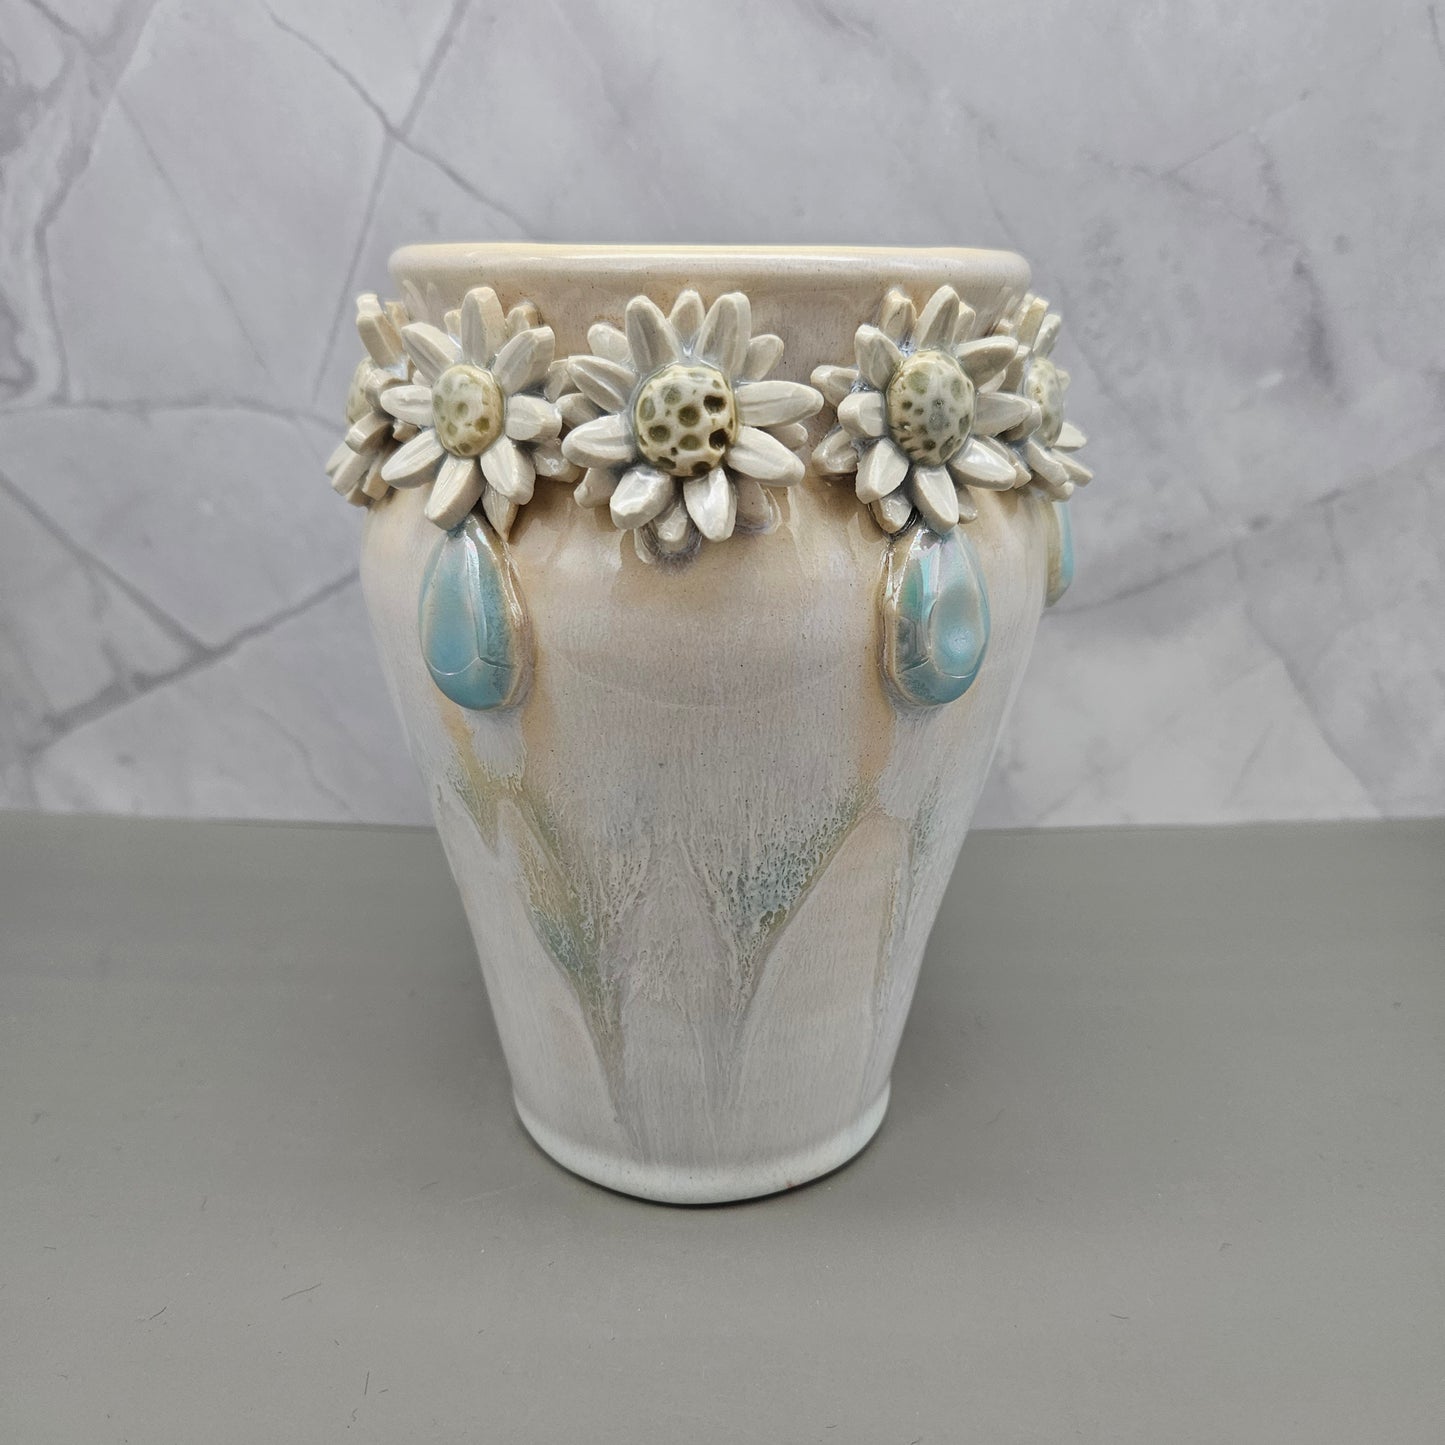 Light blue and white marbled vase with blue mother of pearl jewels